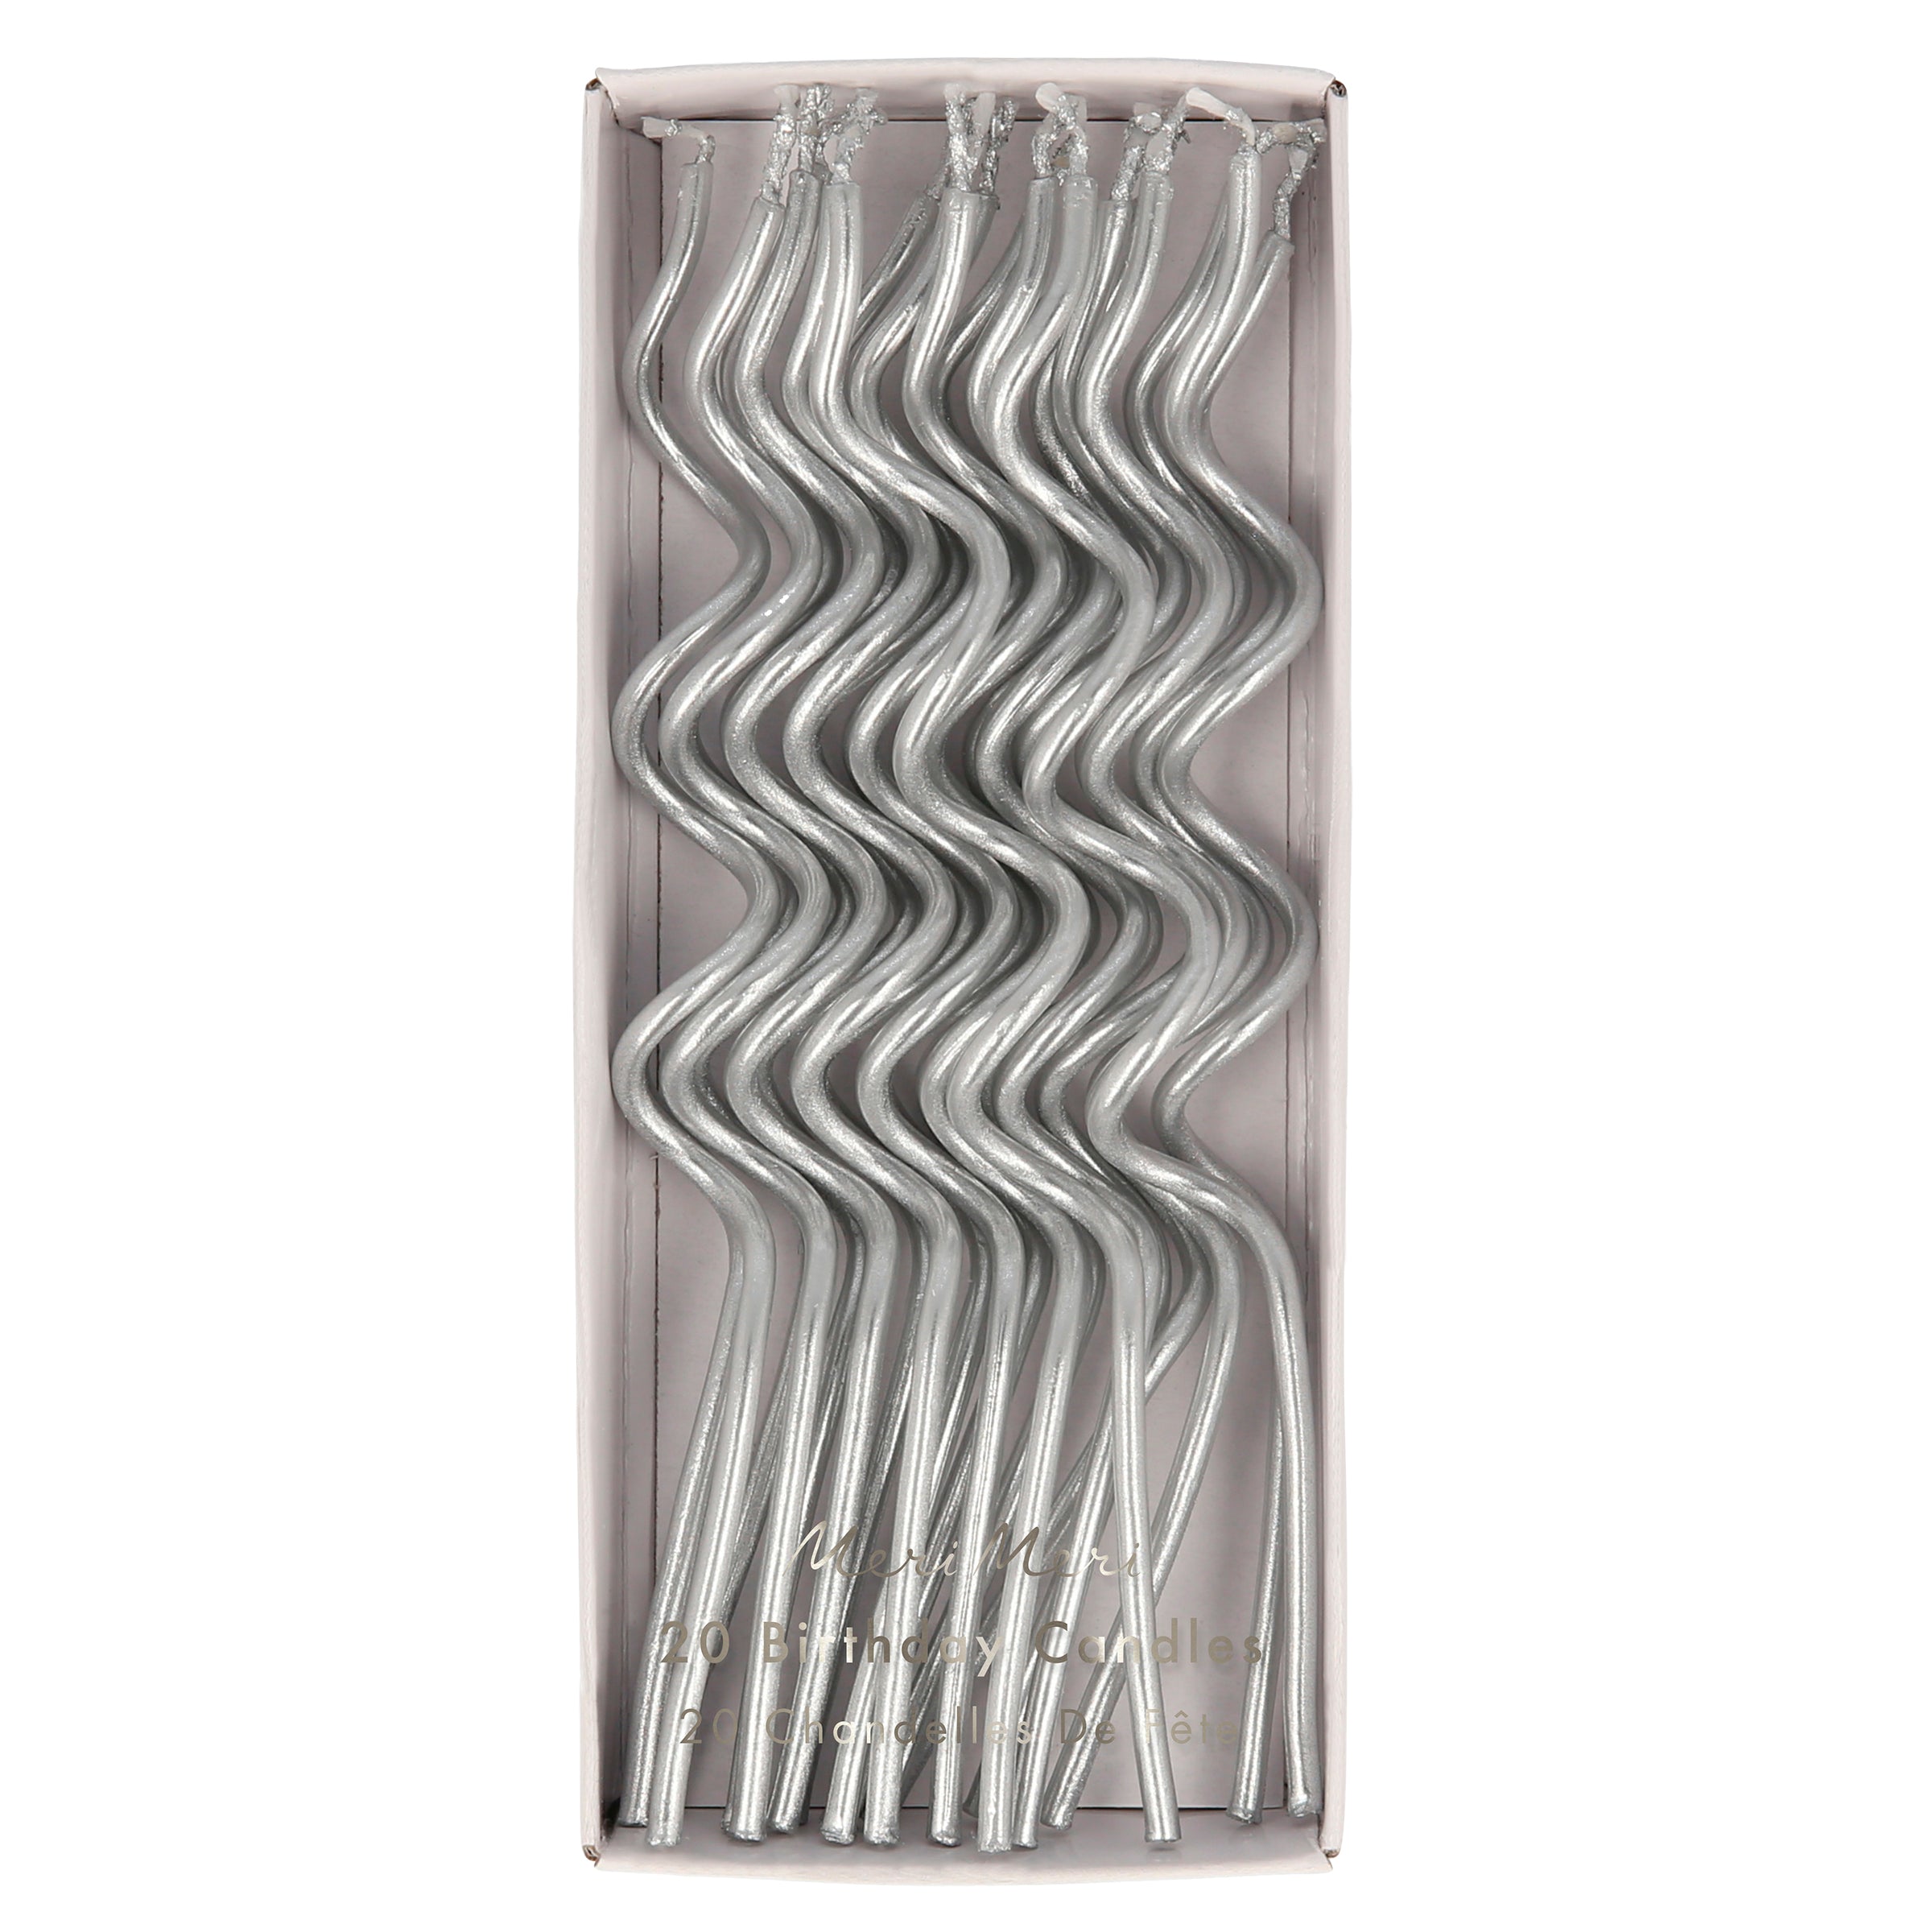 Our silver candles, with a special wavy design, make great birthday cake decorations and are perfect for a space party.